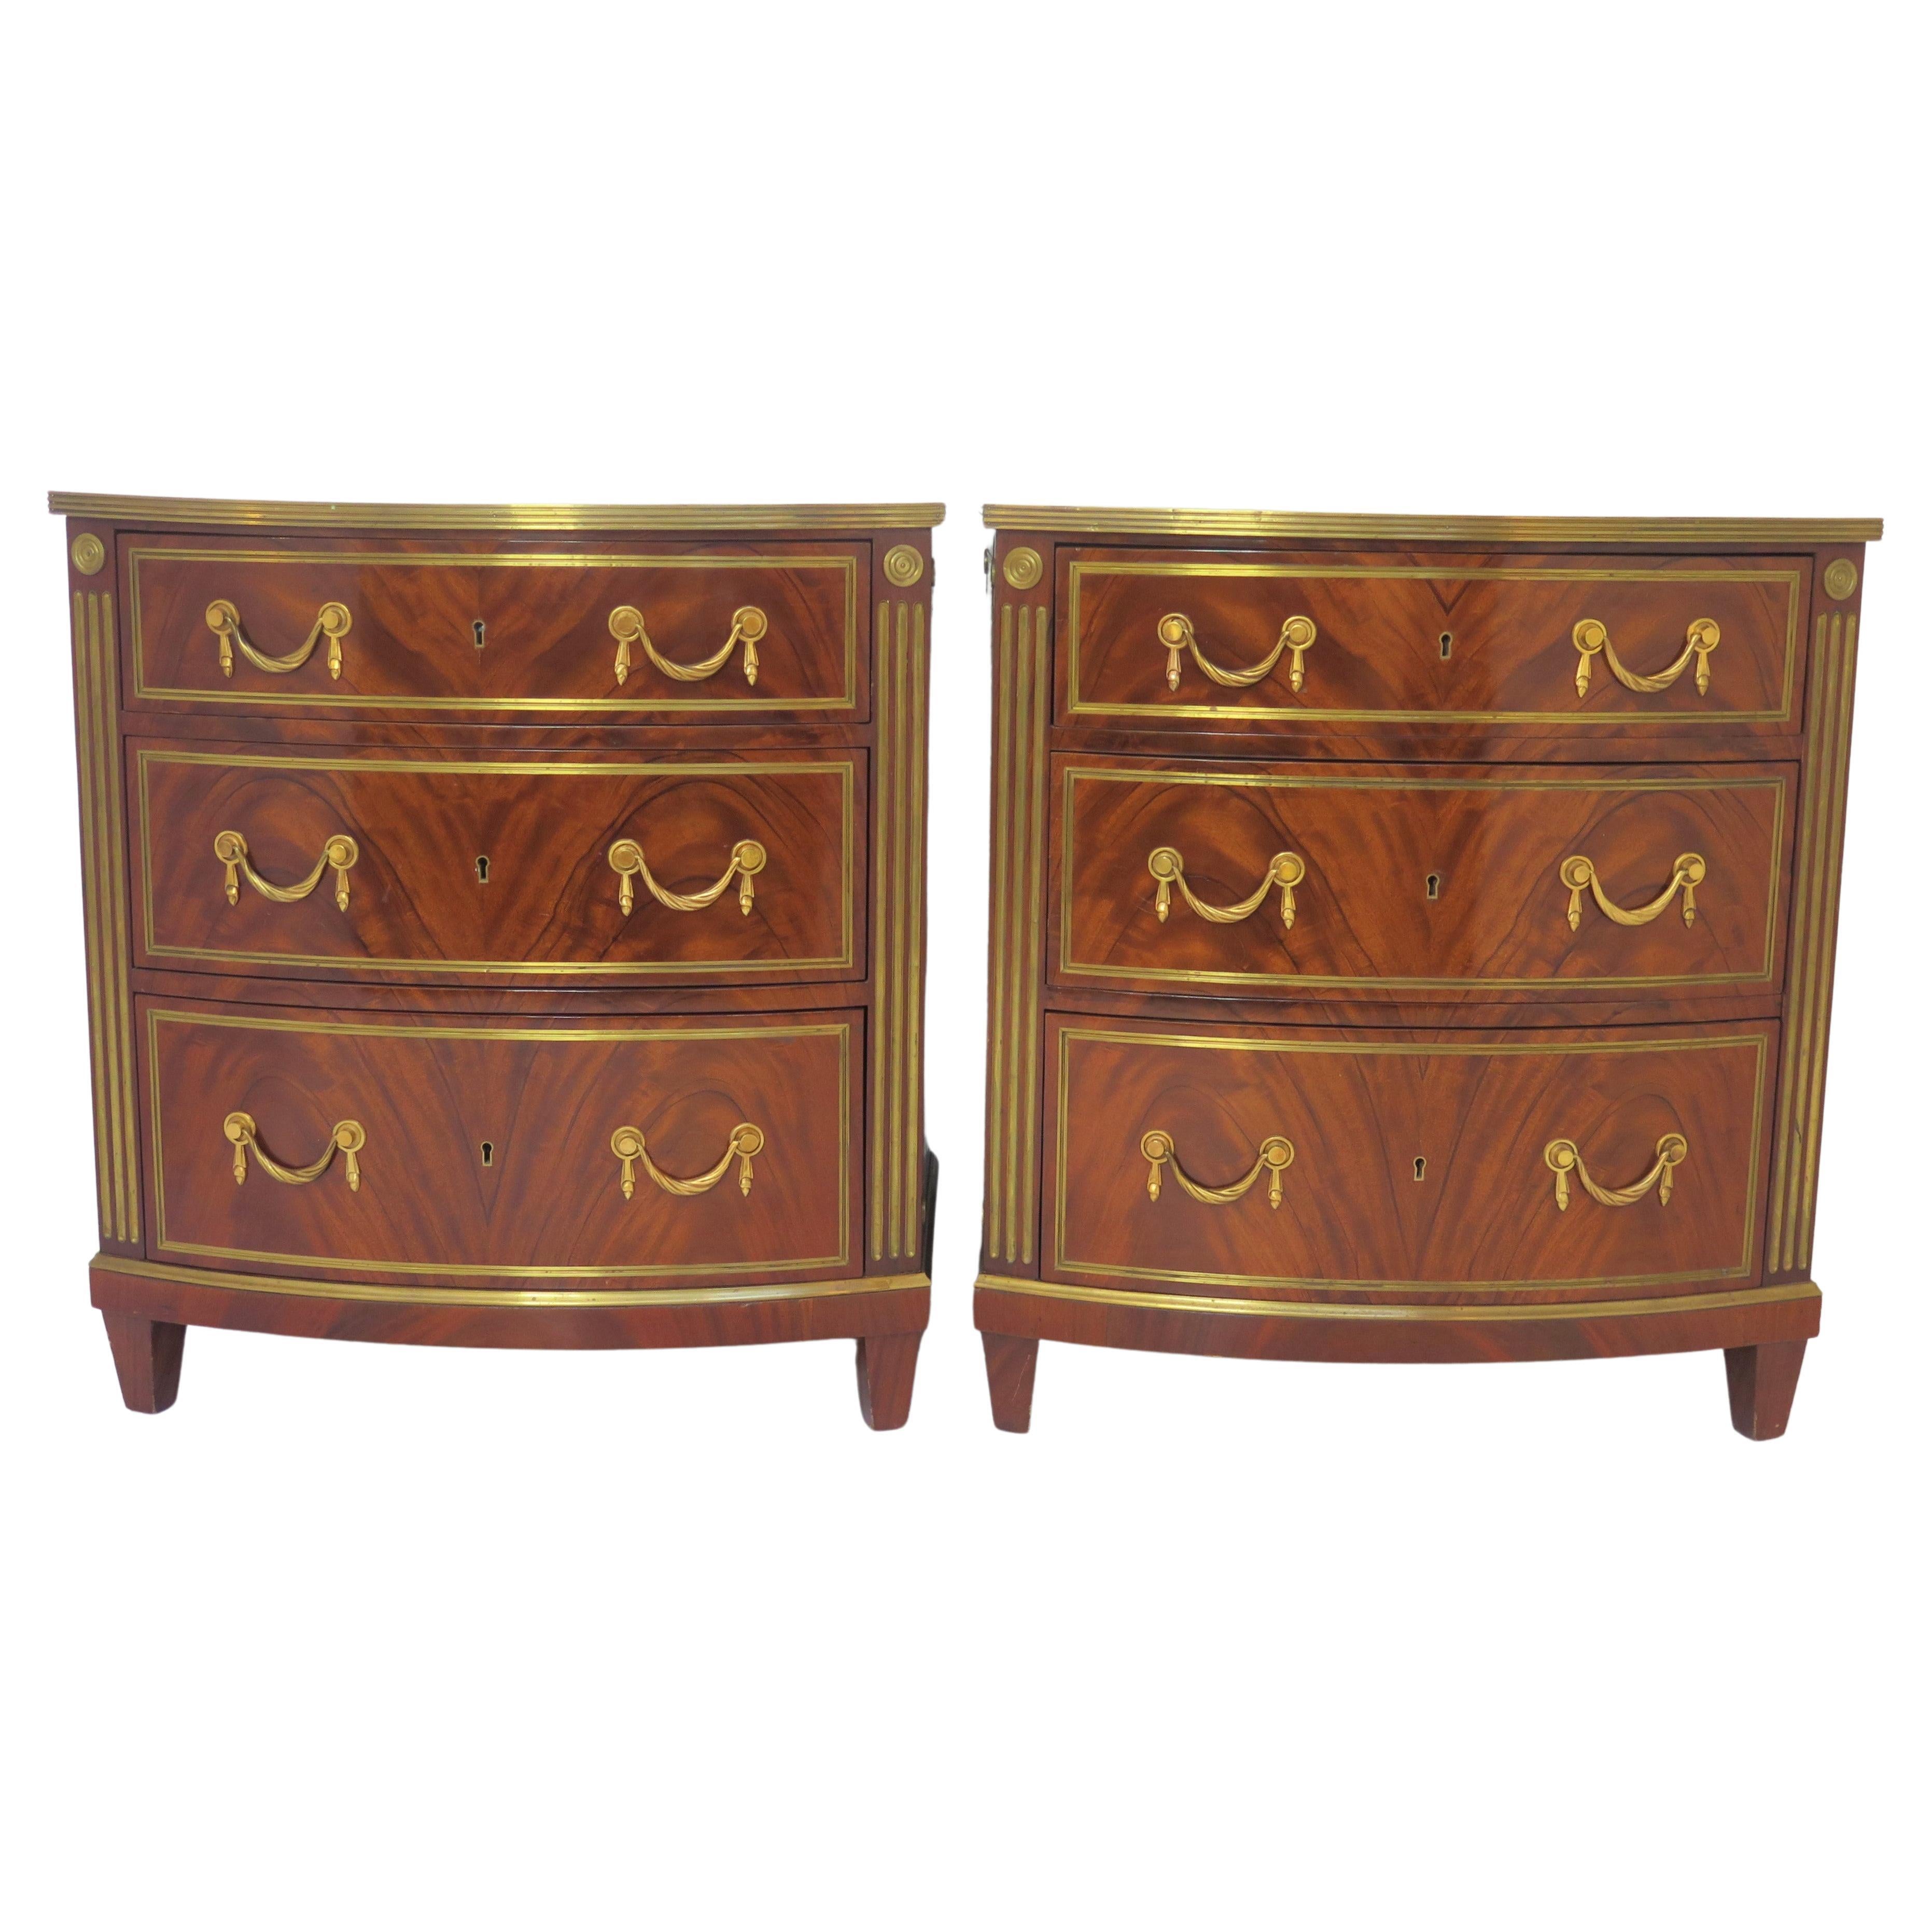 A Pair of Russian Neoclassical Chests of Drawers For Sale